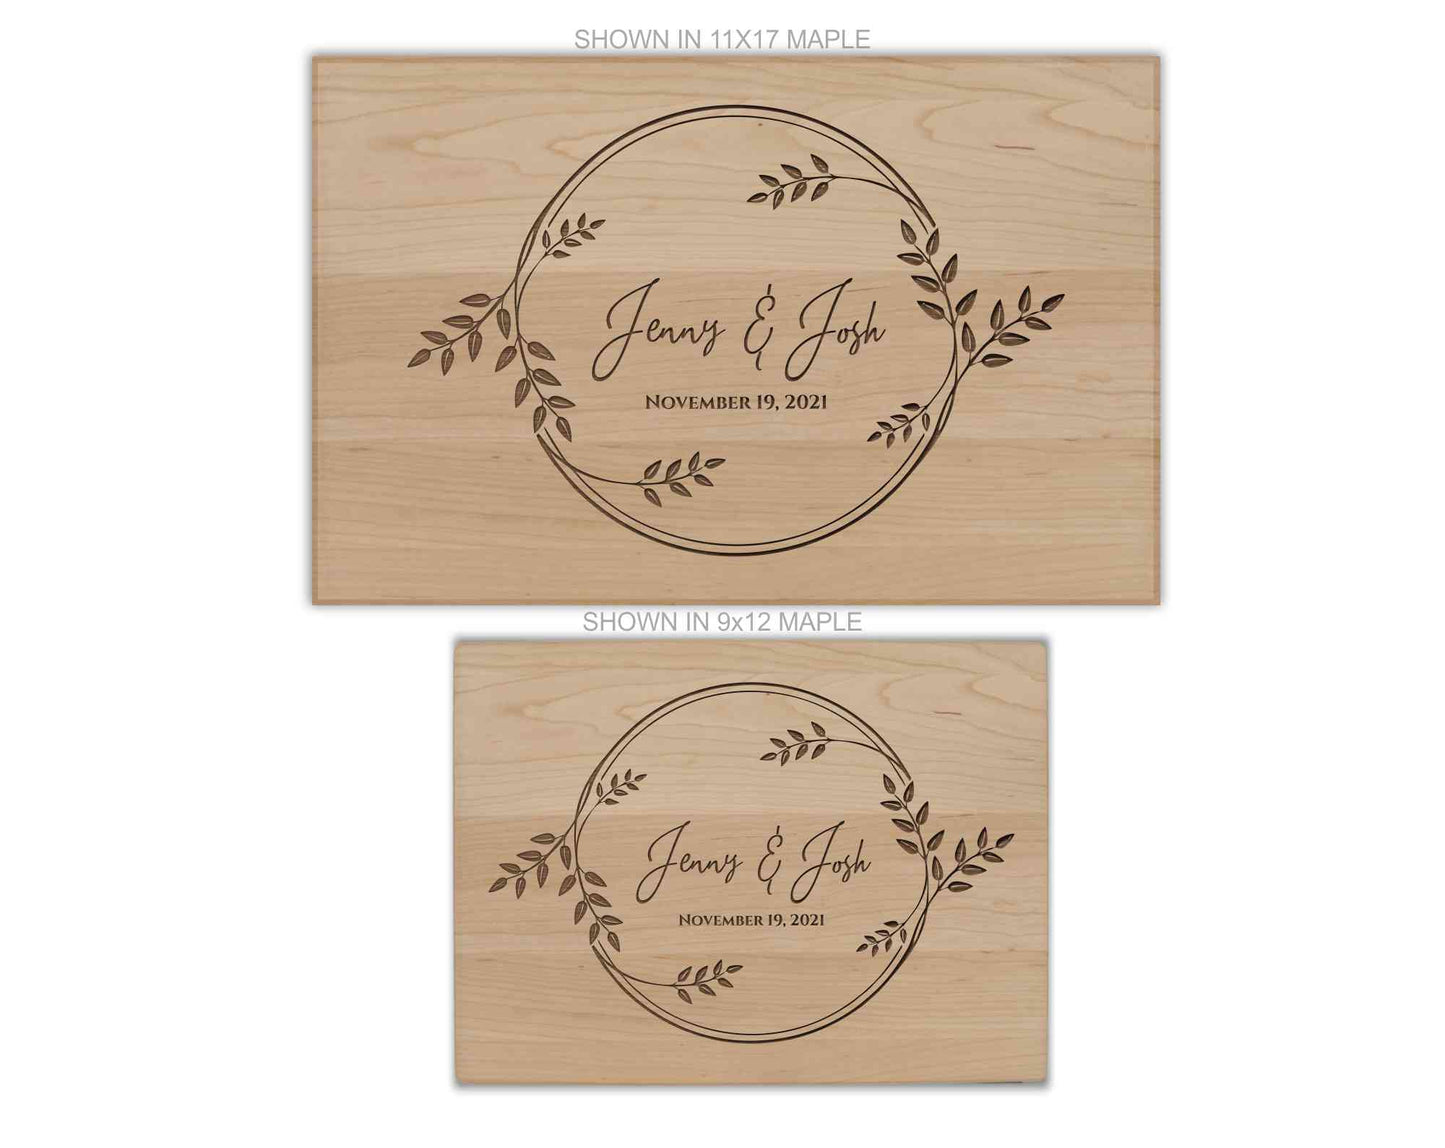 Personalized cutting board with ivy design